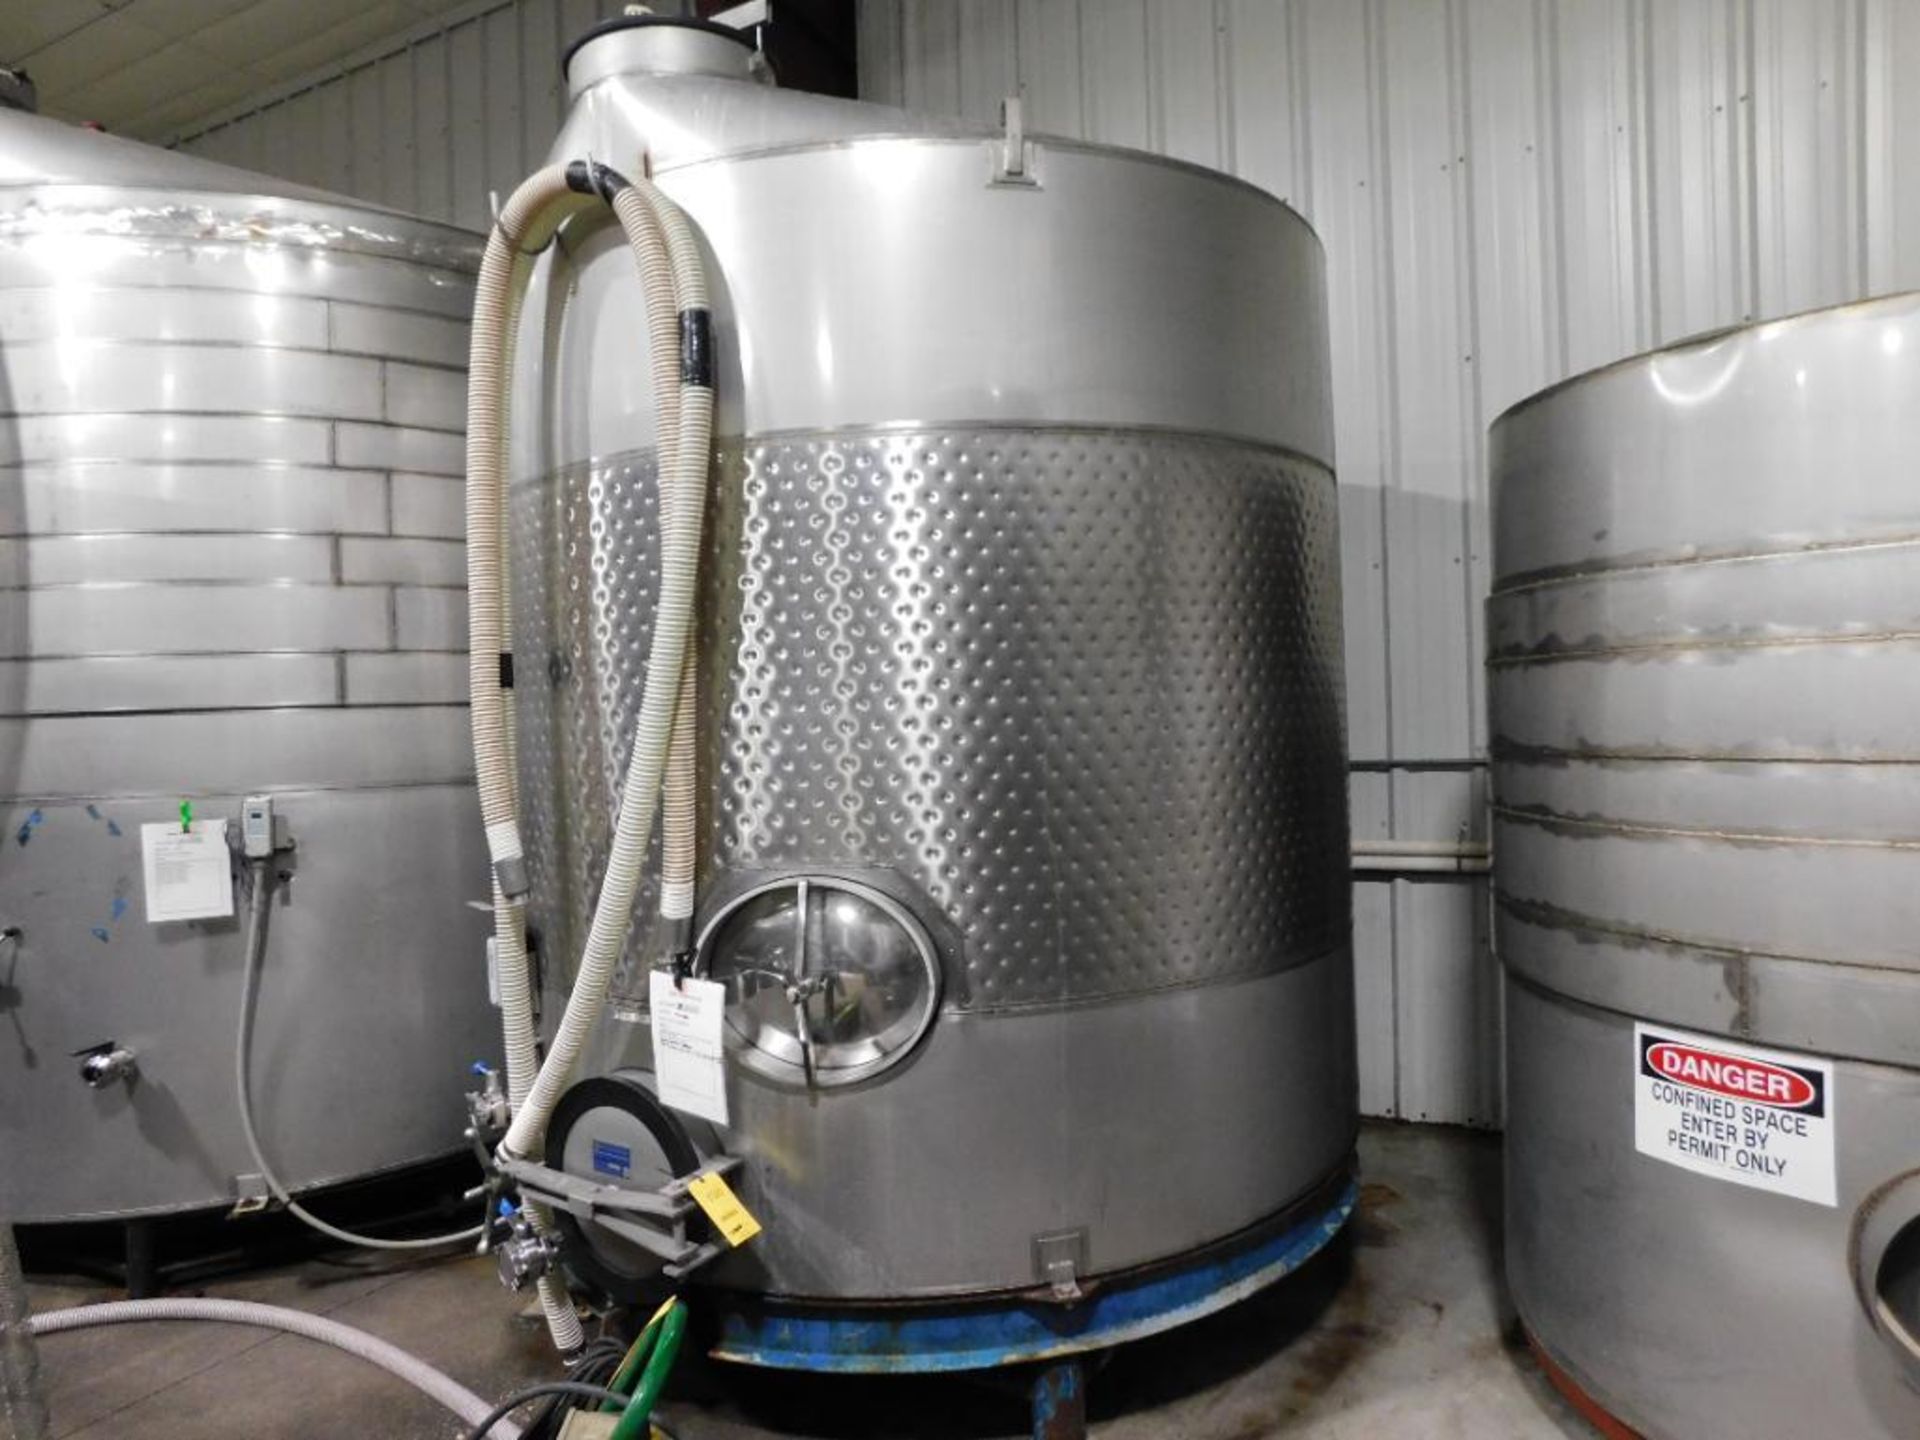 Santa Rossa 3,000 Gallon Stainless Steel Wine Fermentation Tank w/Glycol Jacket (LOCATED IN WINERY) - Image 2 of 3